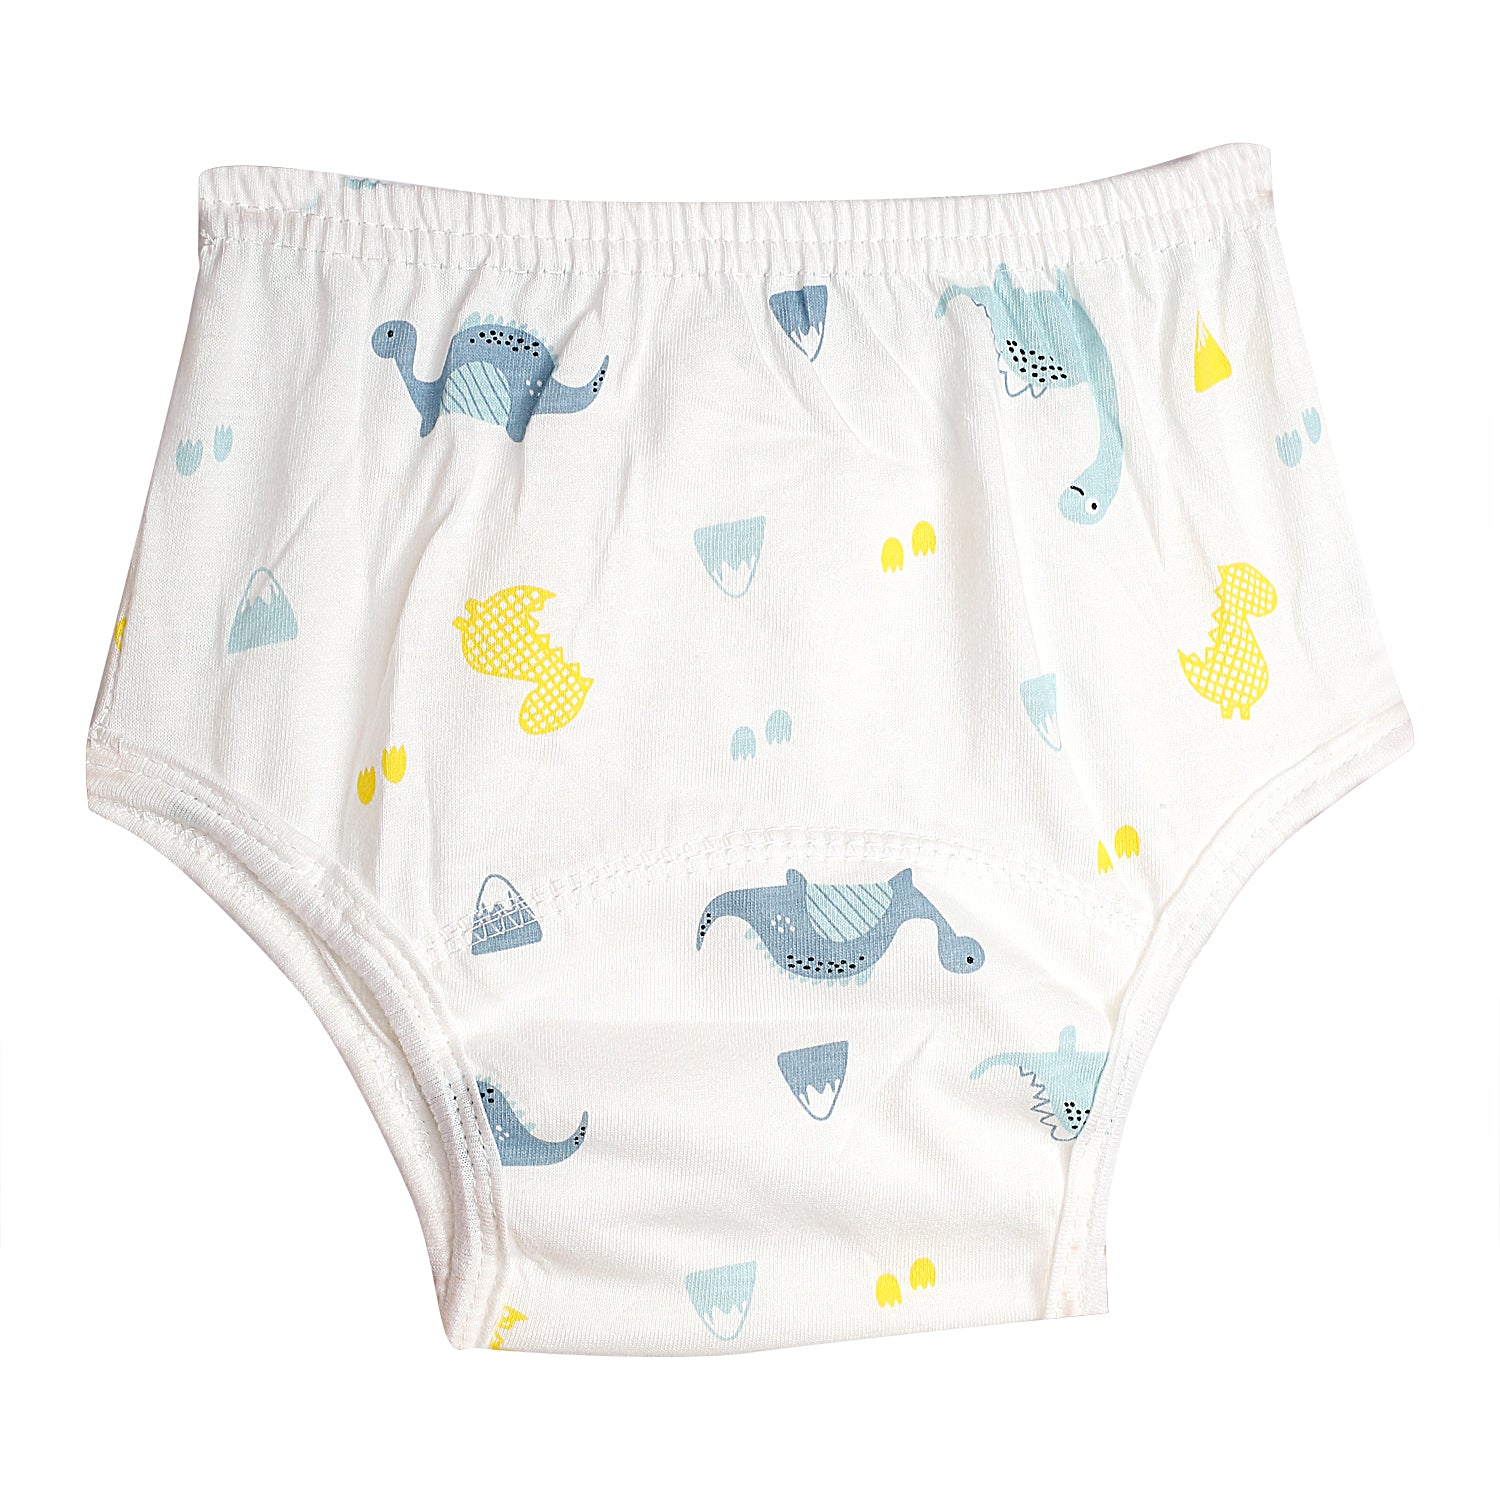 Adjustable & Washable Cloth Diaper Panty 2 Pk Dinosaurs And Fish Multicolour - Baby Moo